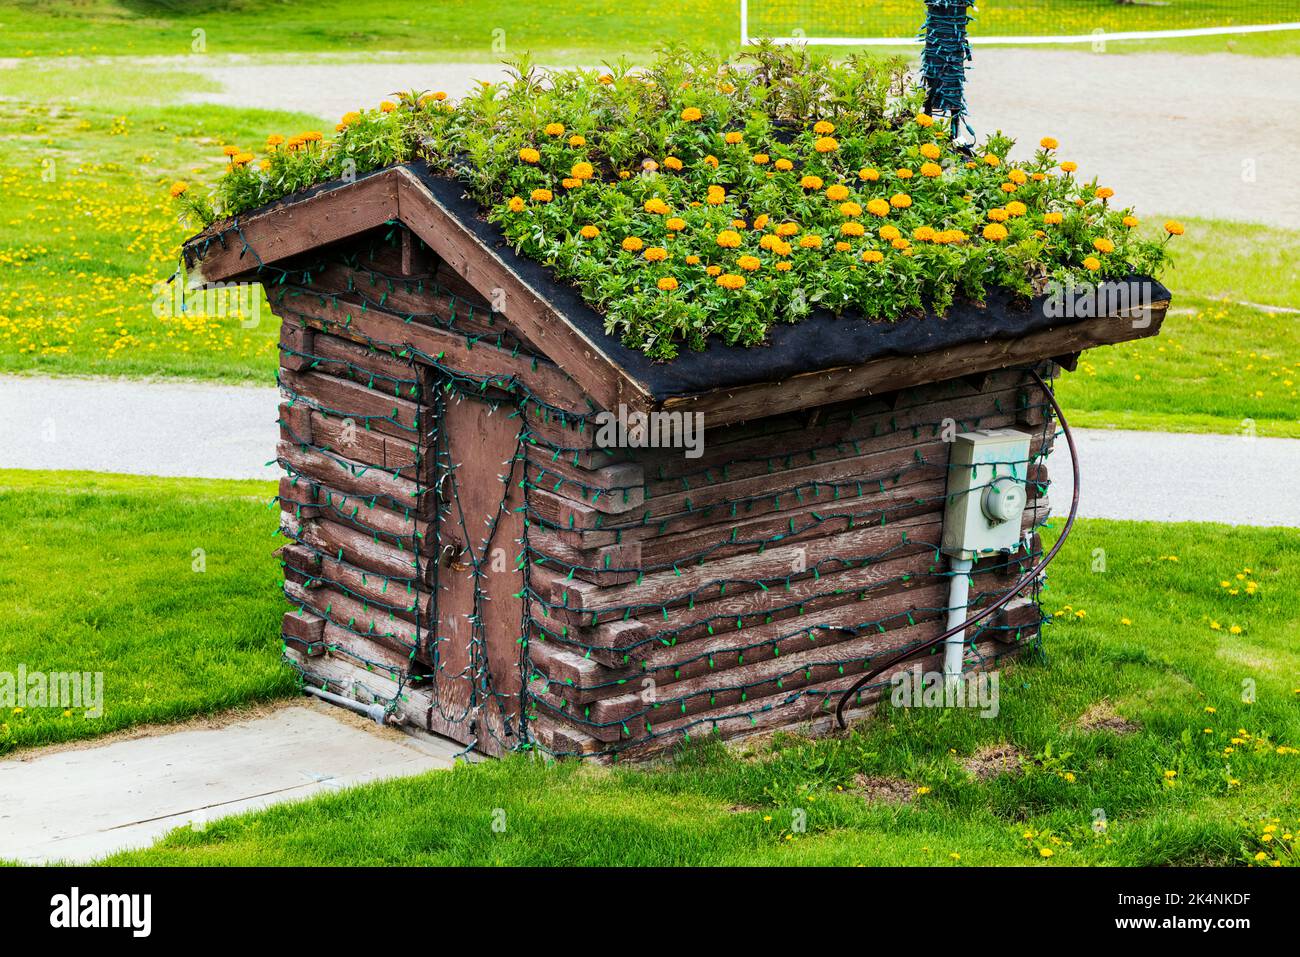 Yellow Marigold flowers growing on the roof of a small historic log cabin; Whitehorse; Yukon Territories; Canada Stock Photo